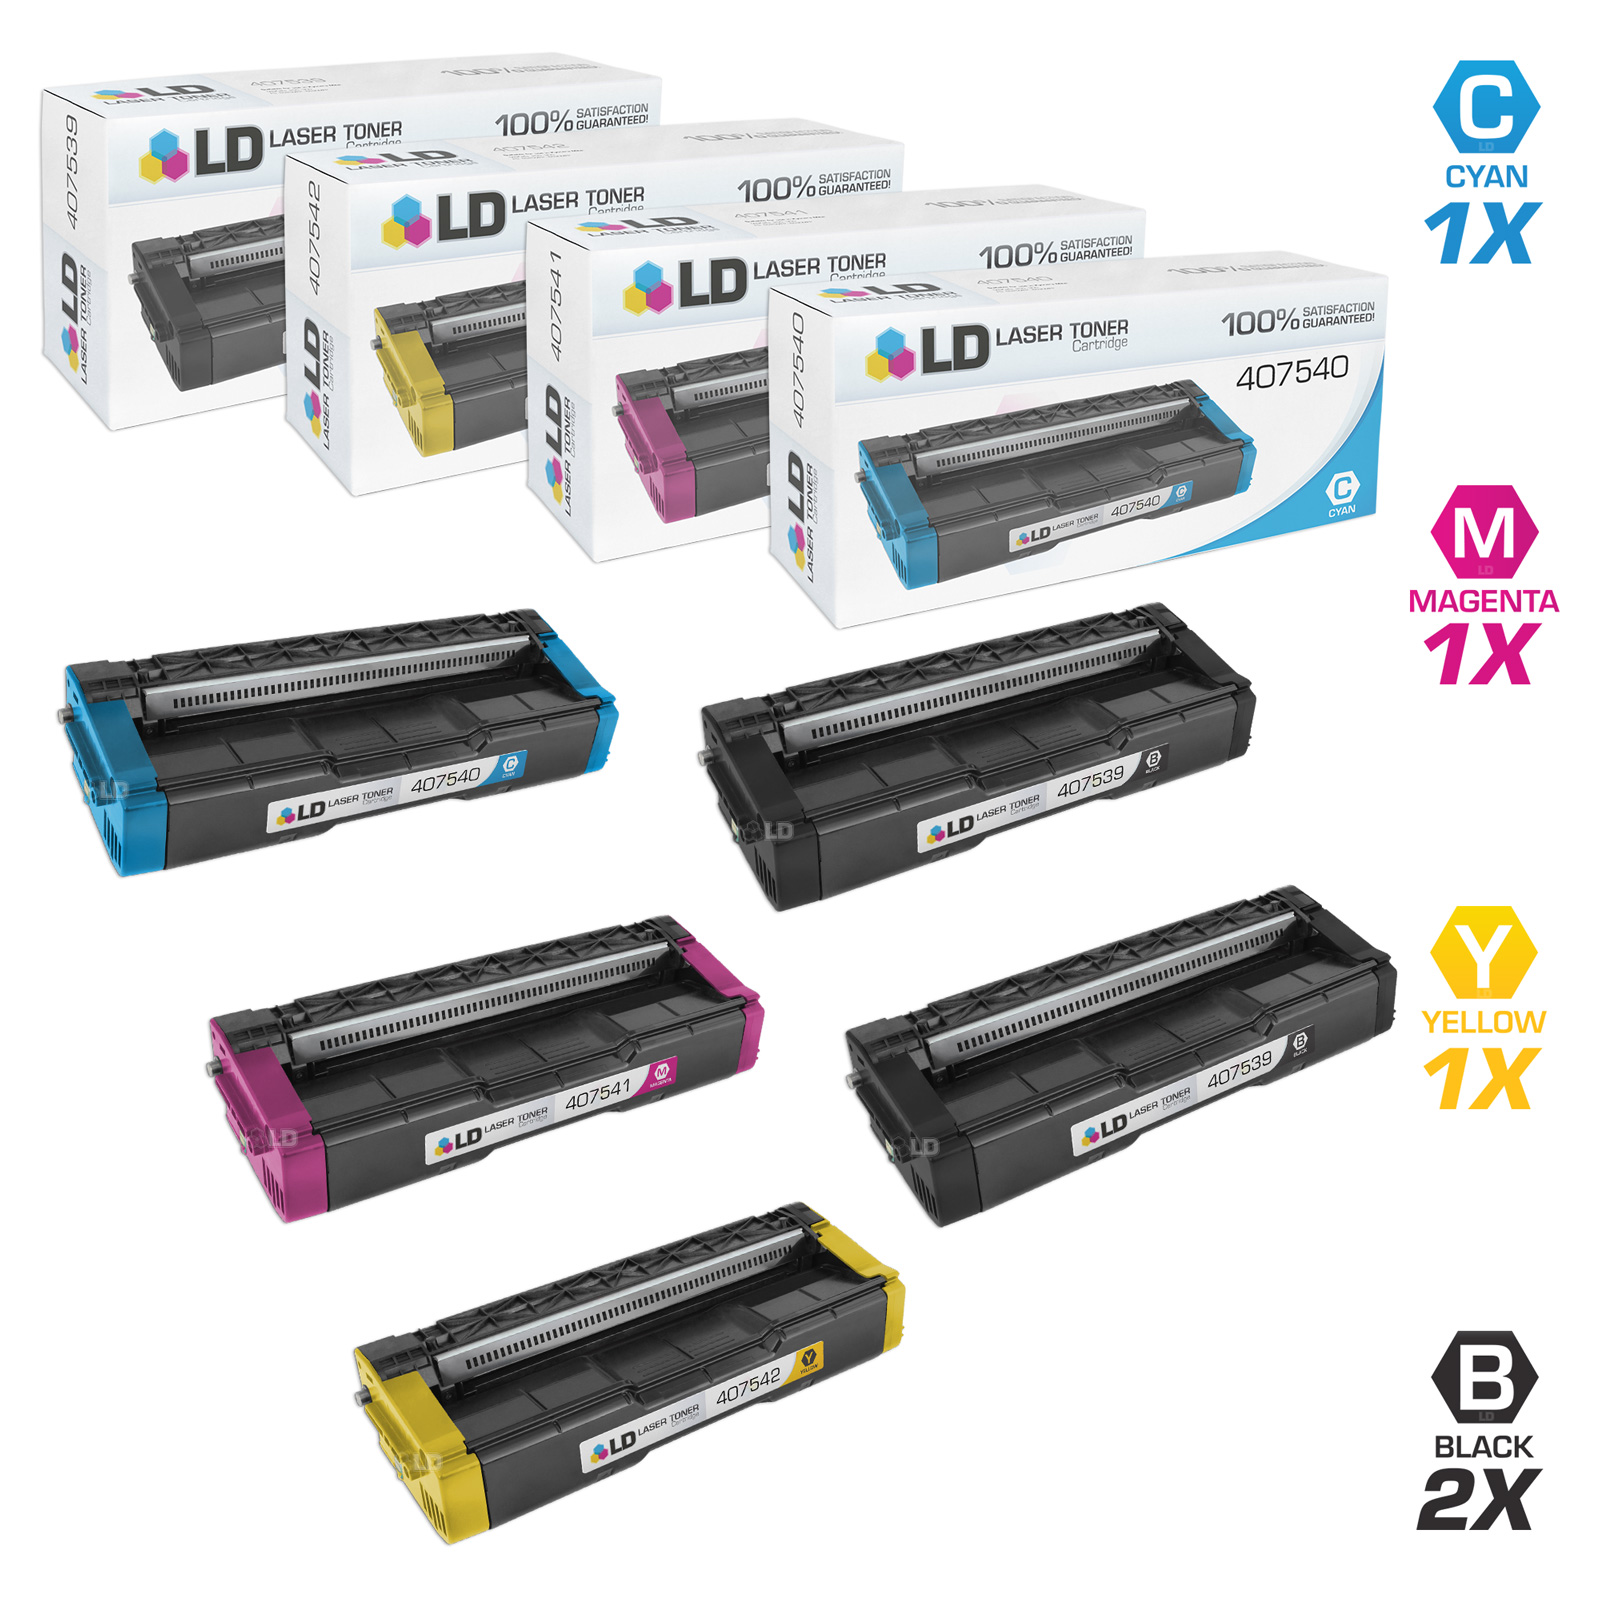 LD Compatible Replacement for Ricoh SP C250A Toner Cartridges: 2 407539 Black, 1 407540 Cyan, 1 407541 Magenta, 1 407542 Yellow for use in SP C250DN, SP C250SF, SP C261DNw, SP C261SFNw - image 1 of 7